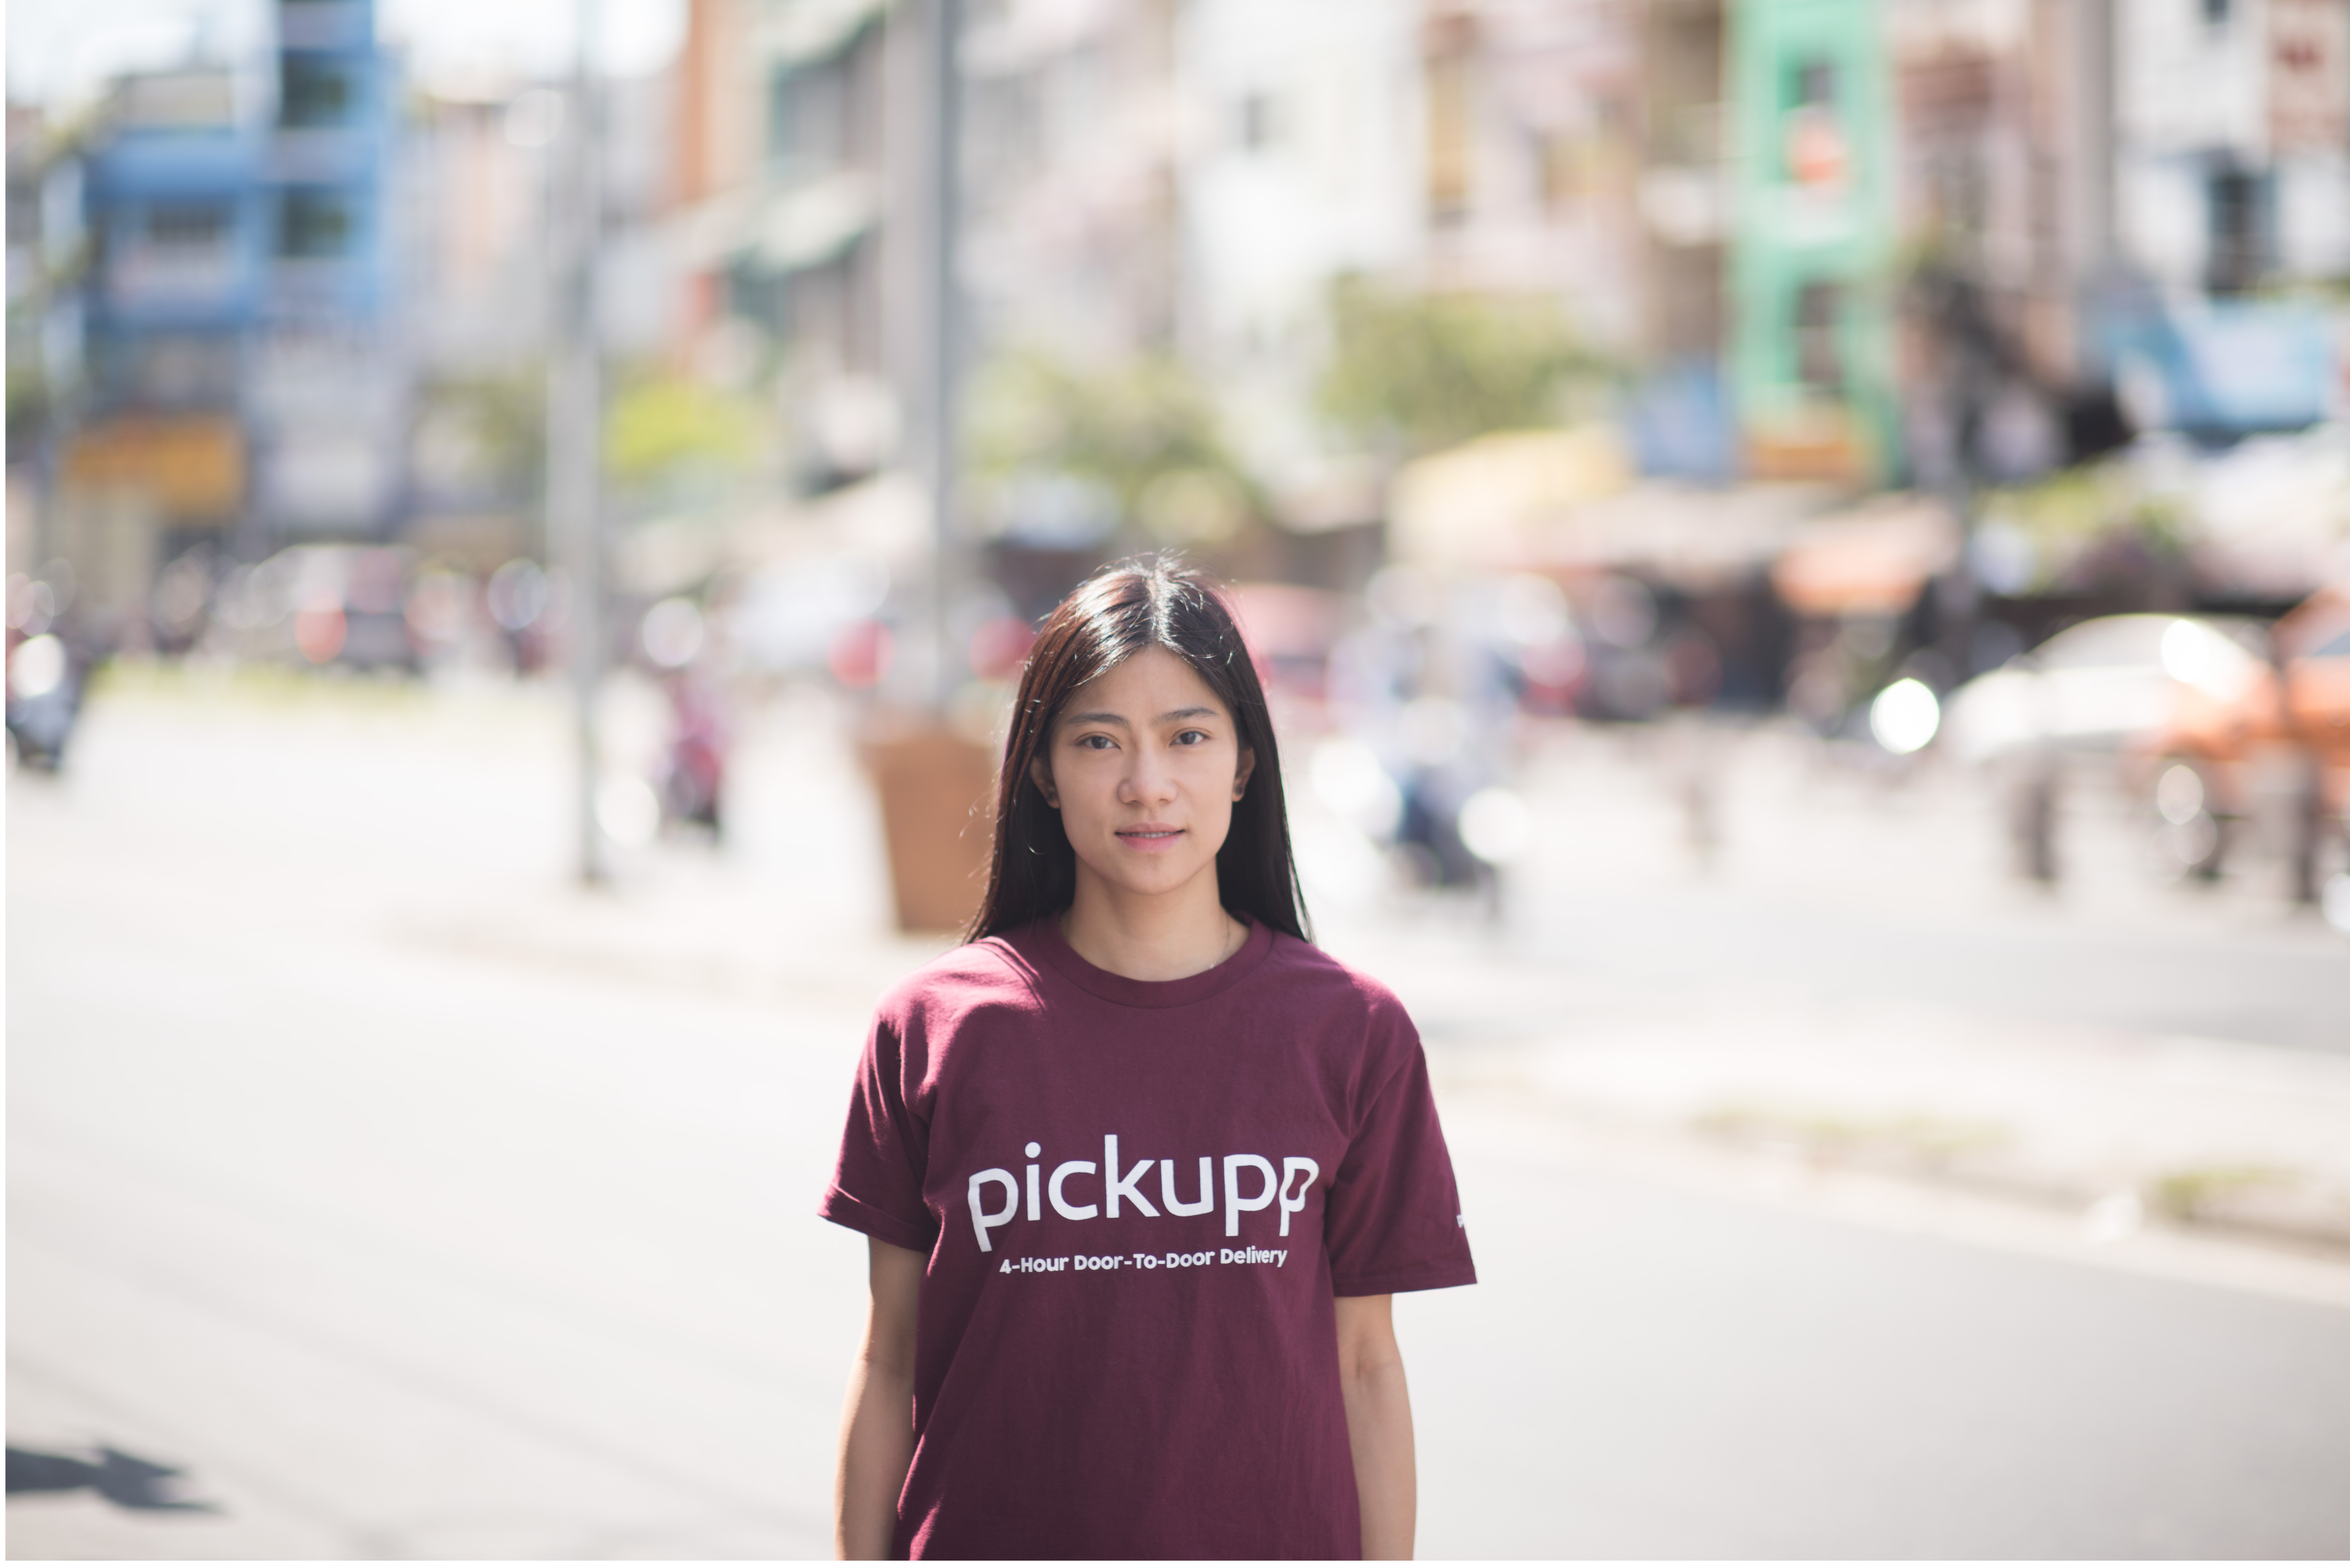 Logistics startup co-founder and chief executive officer Crystal Pang